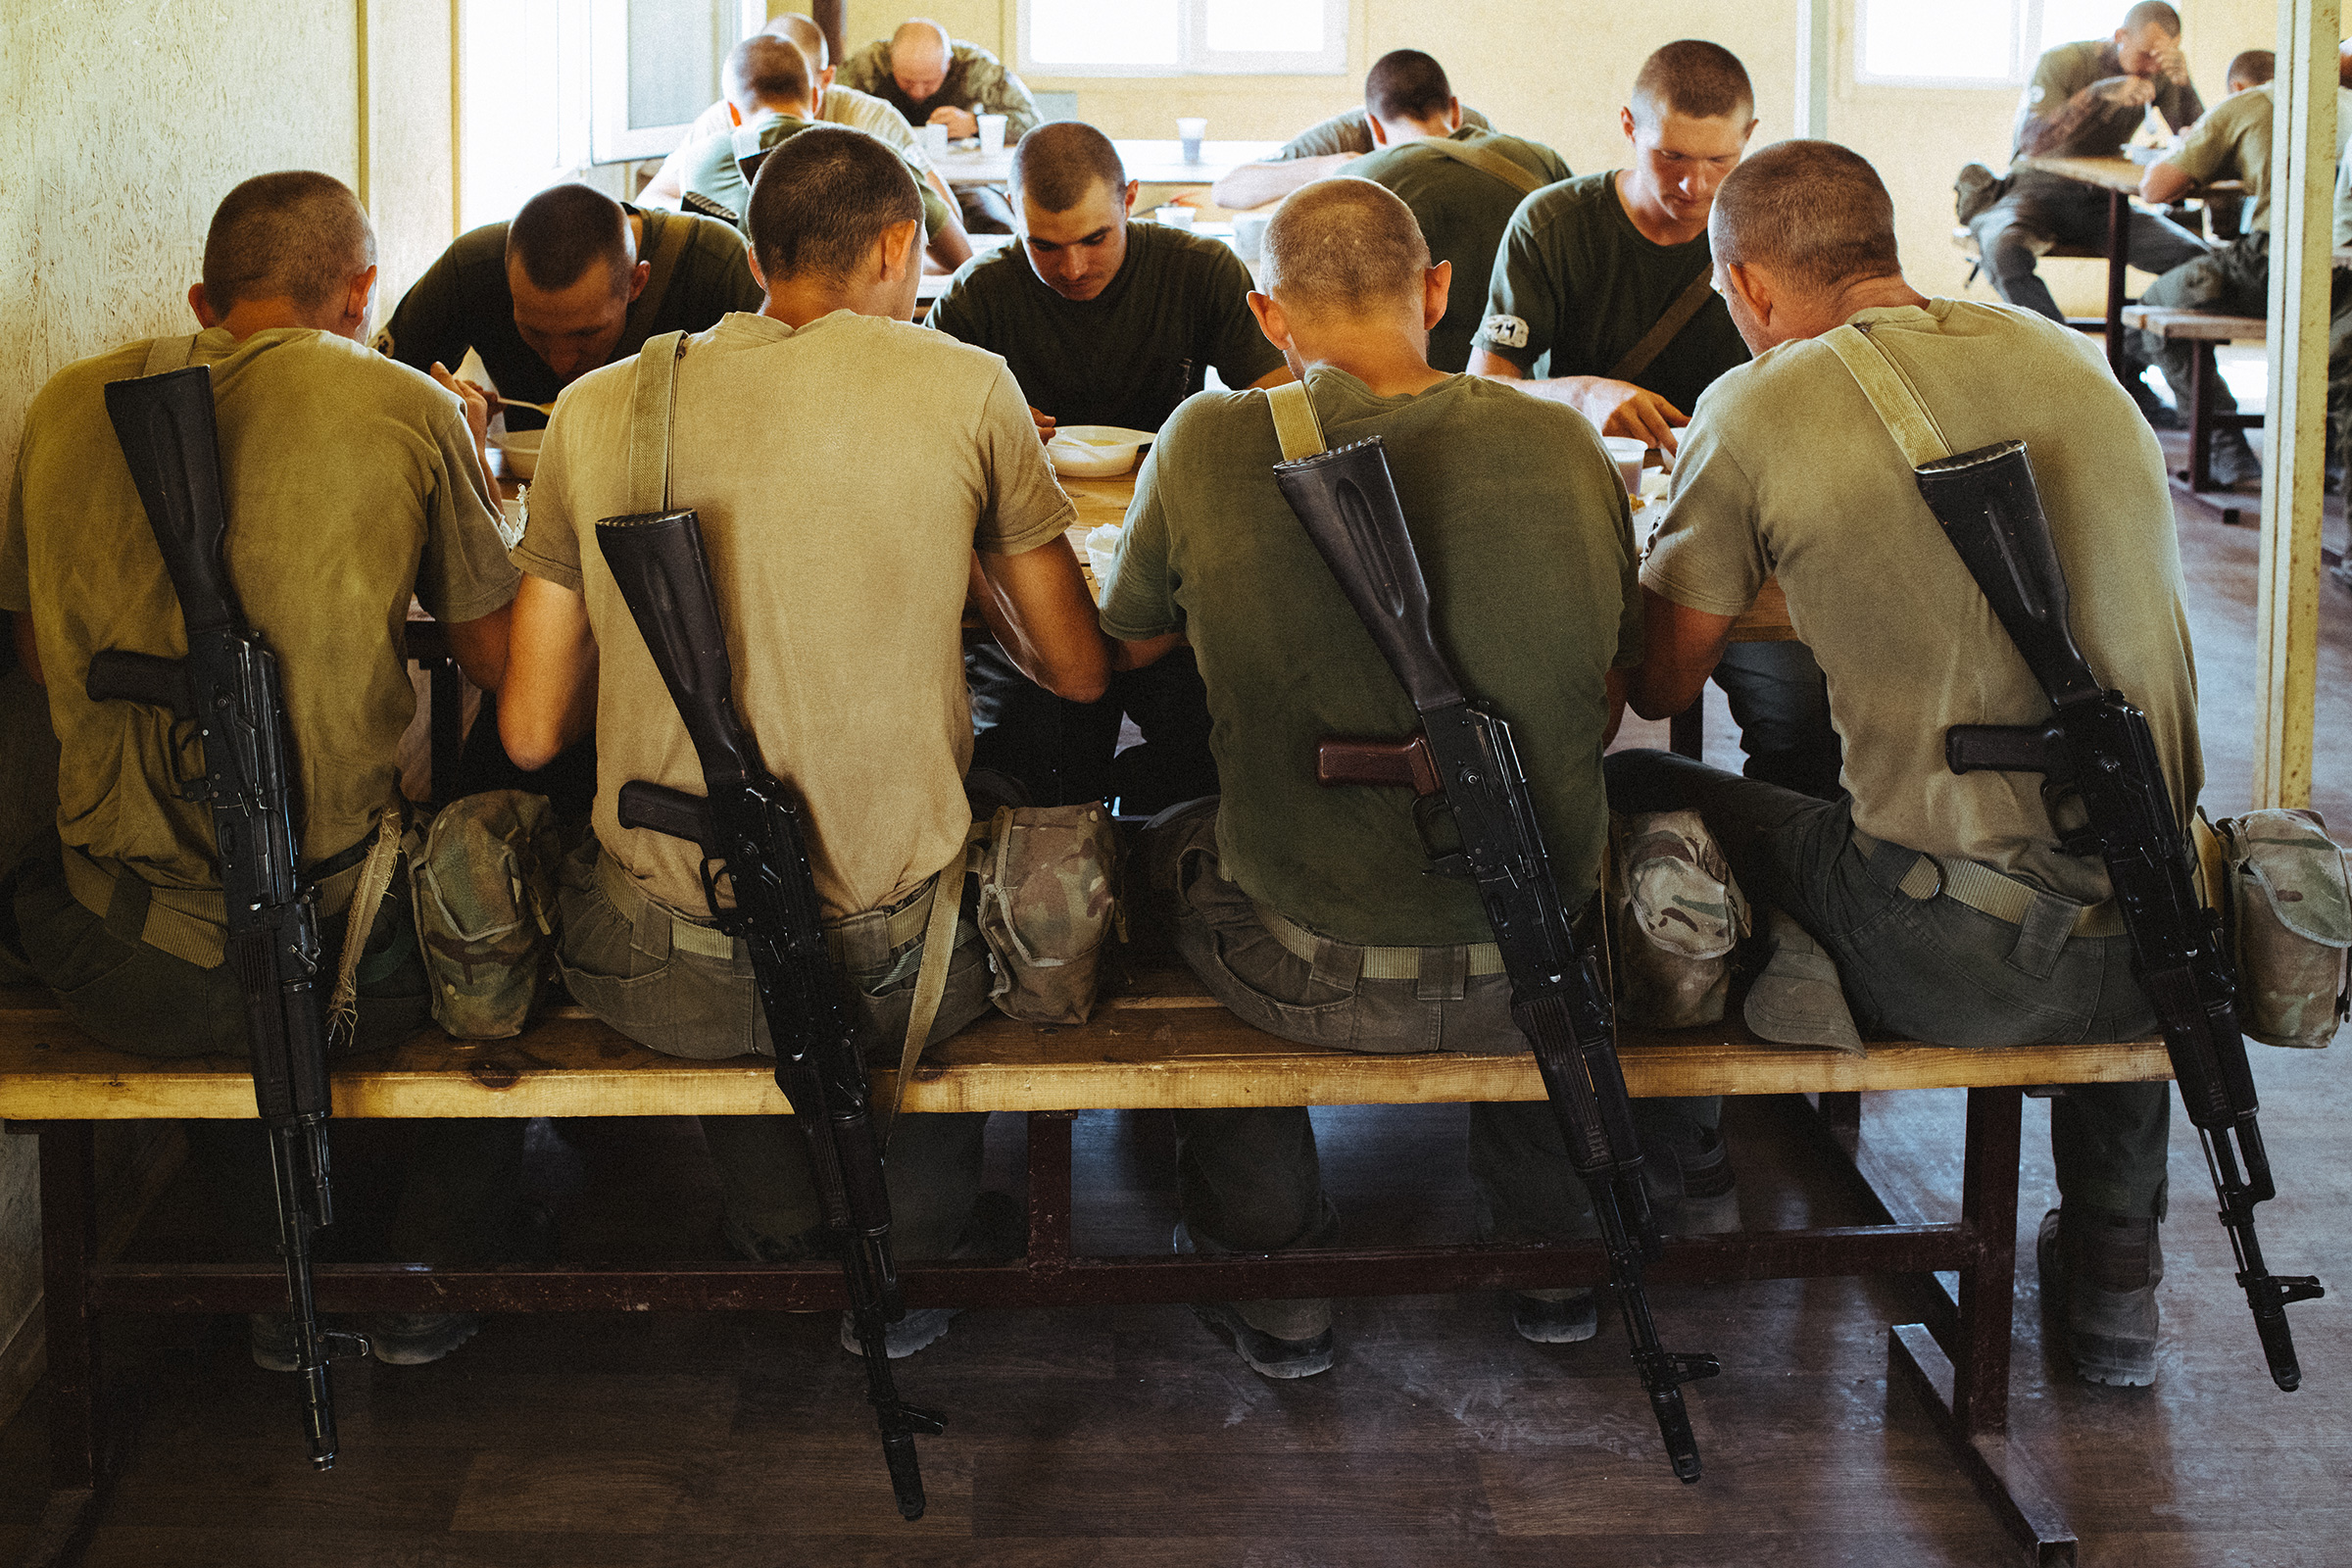 Weapons rest off the backs of recruits during a shared meal. At least since 2018, when the U.S. Congress explicitly barred any U.S. support for Azov, its fighters have been unable to train alongside troops from the U.S.-led NATO alliance.